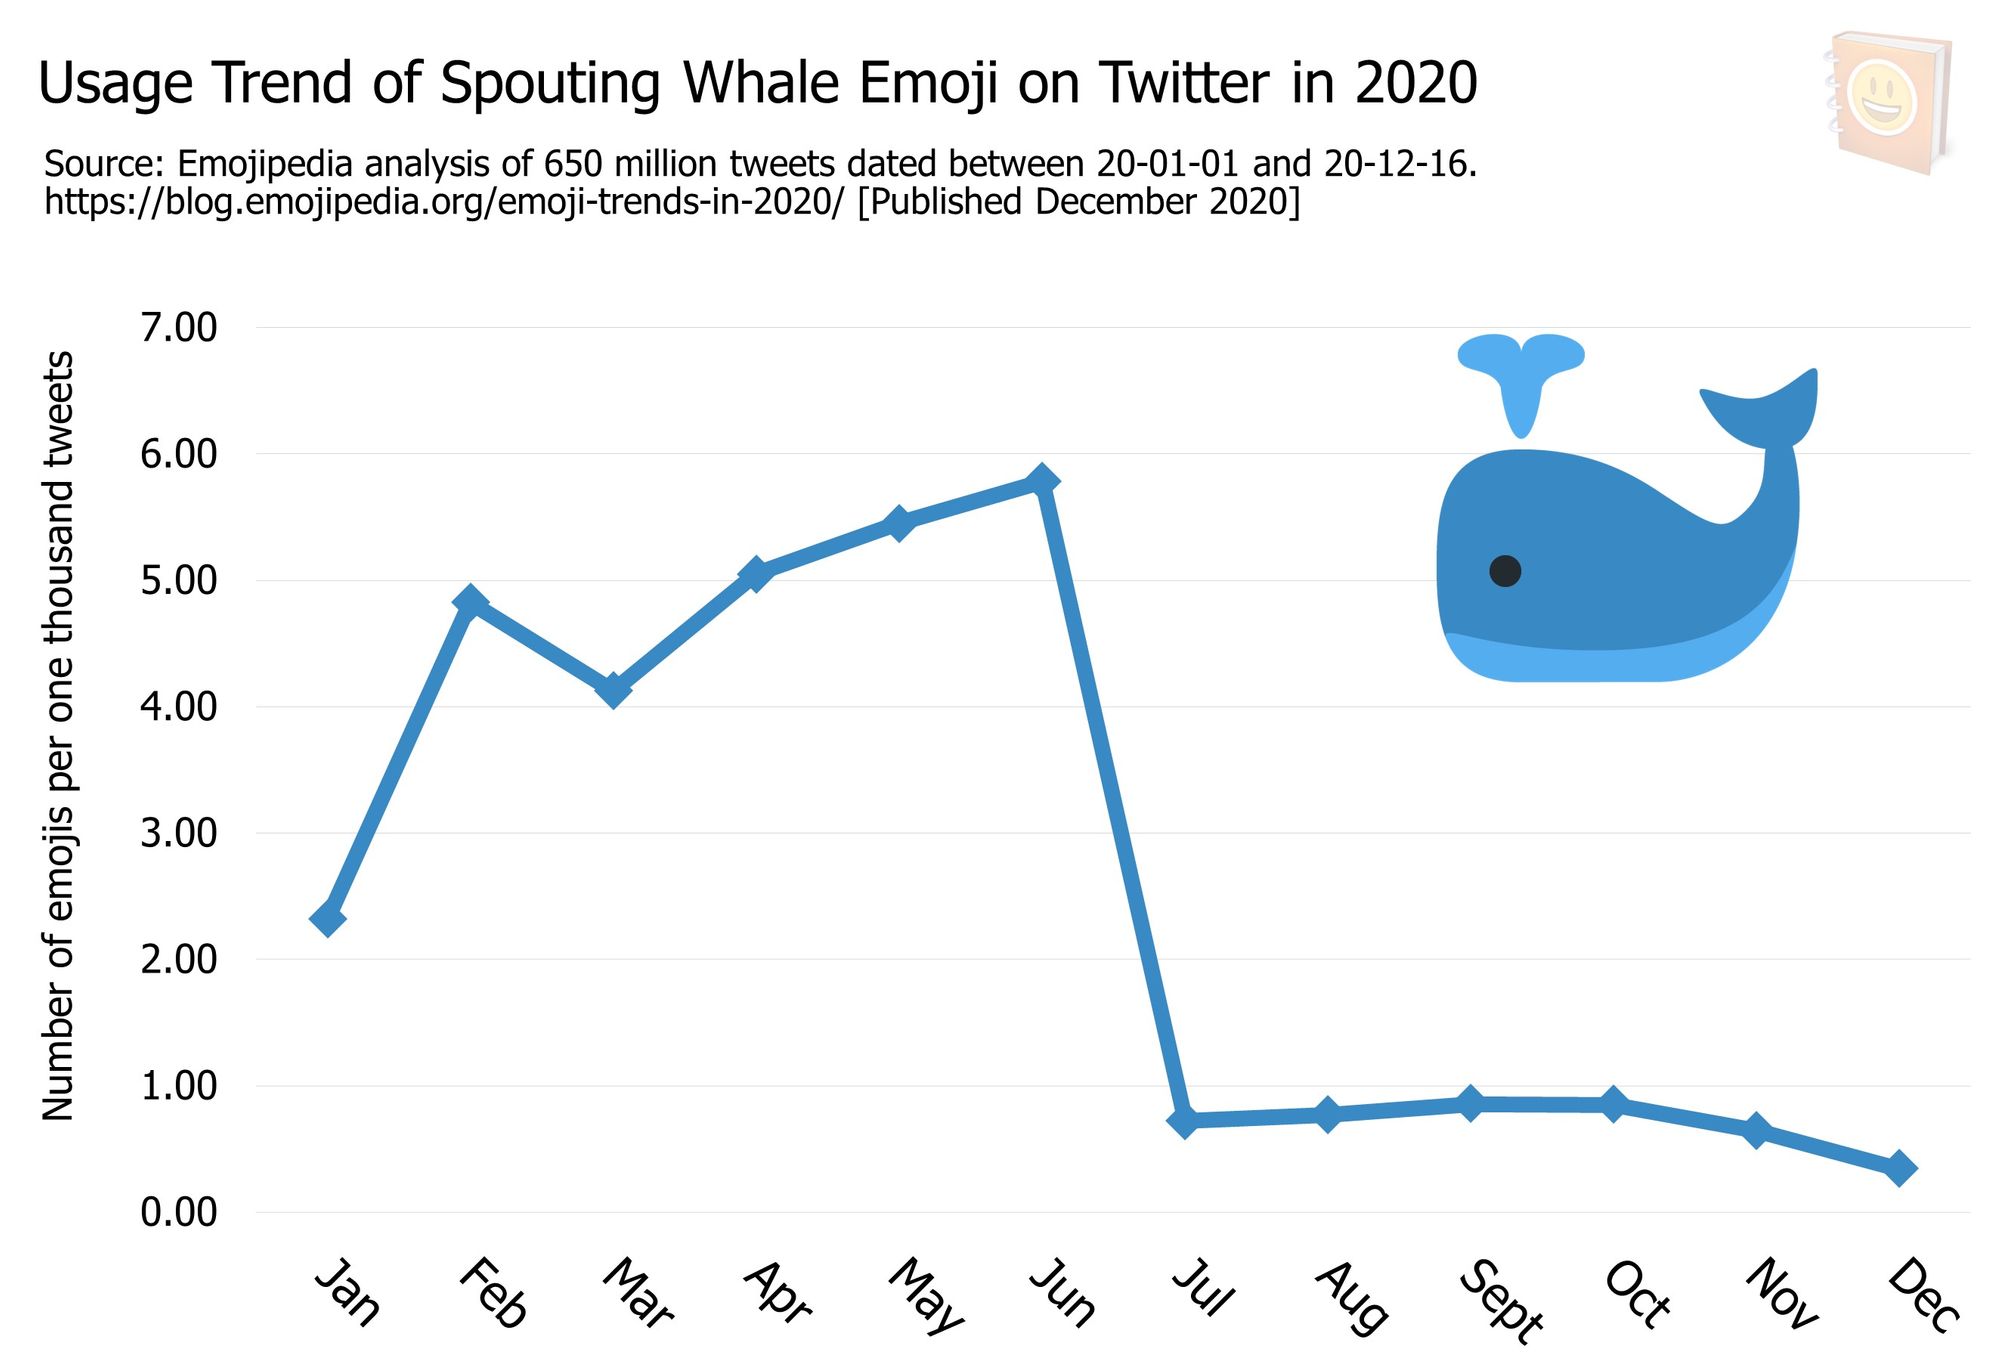 Emoji-Trends-In-2020---Usage-Trend-of-Spouting-Whale-Emoji-on-Twitter-in-2020